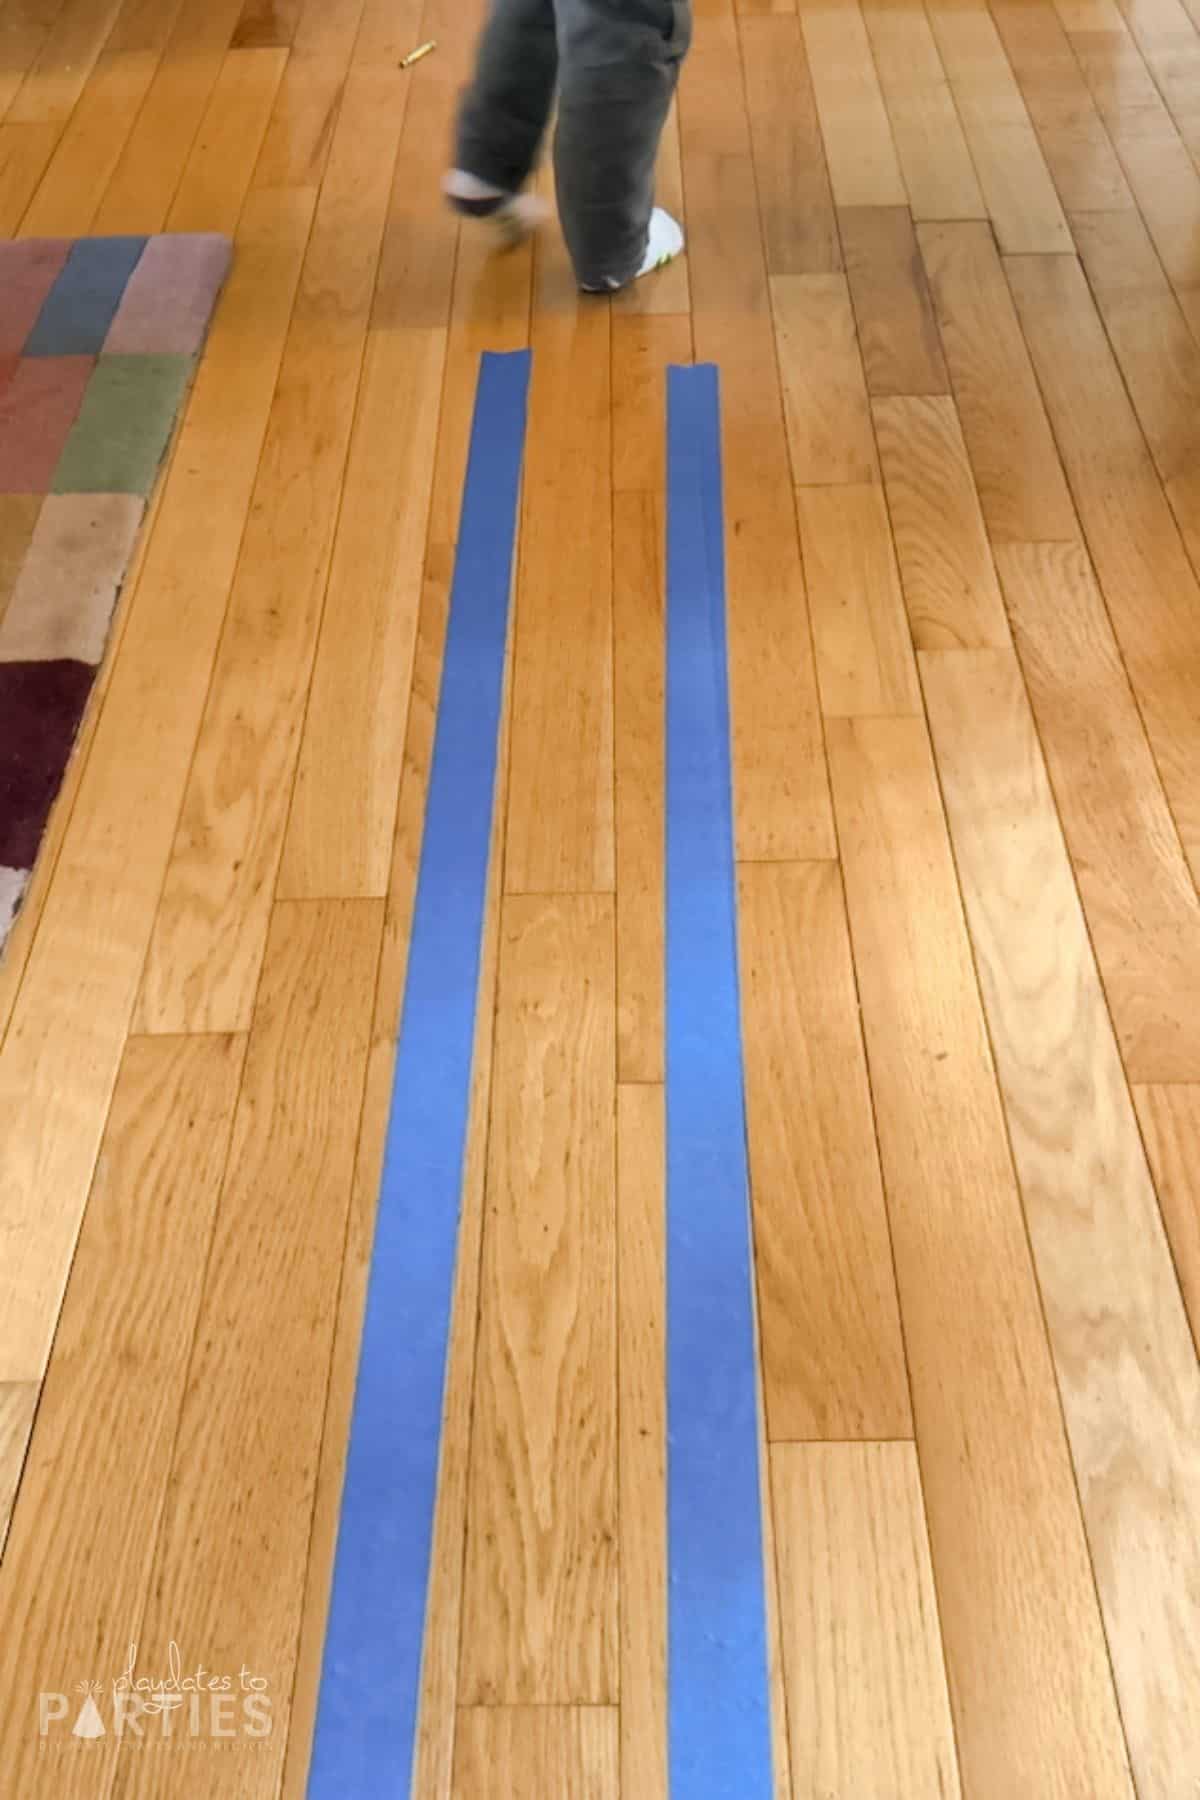 Painter's tape made in two parallel lines on a hardwood floor